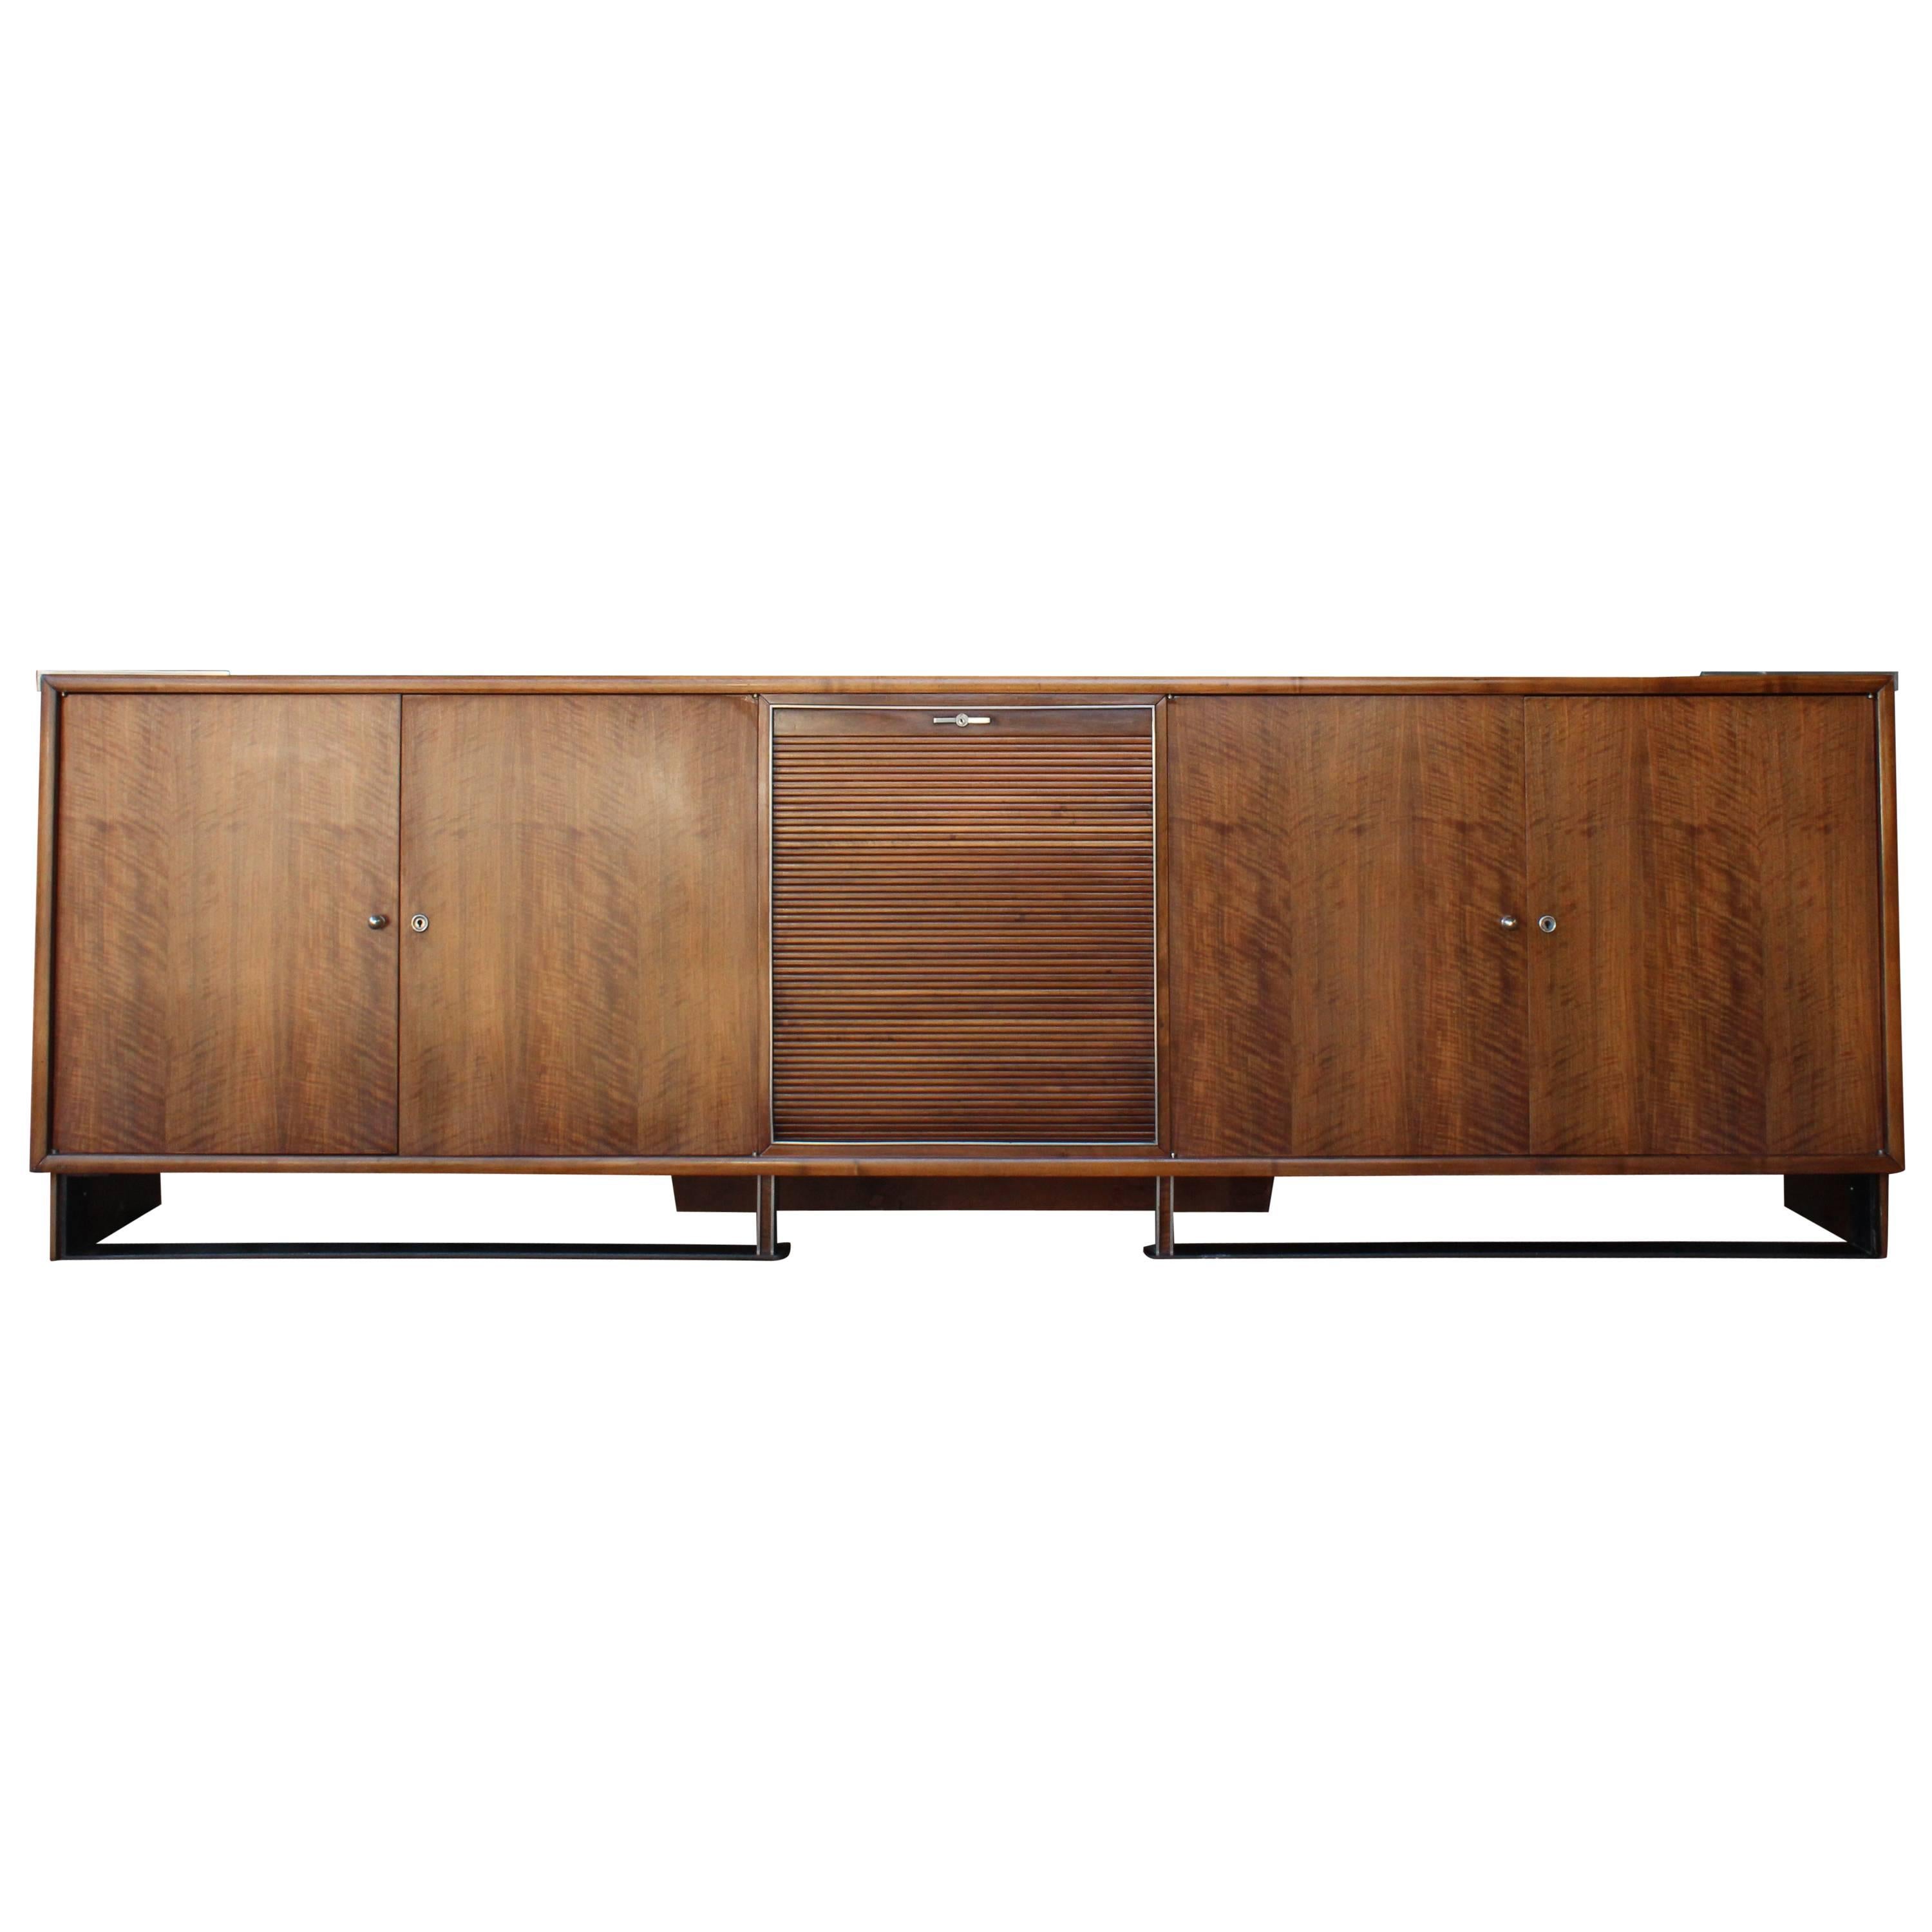 Paul Dupré-Lafon Walnut, Iron and Nickel Tambour Front Cabinet